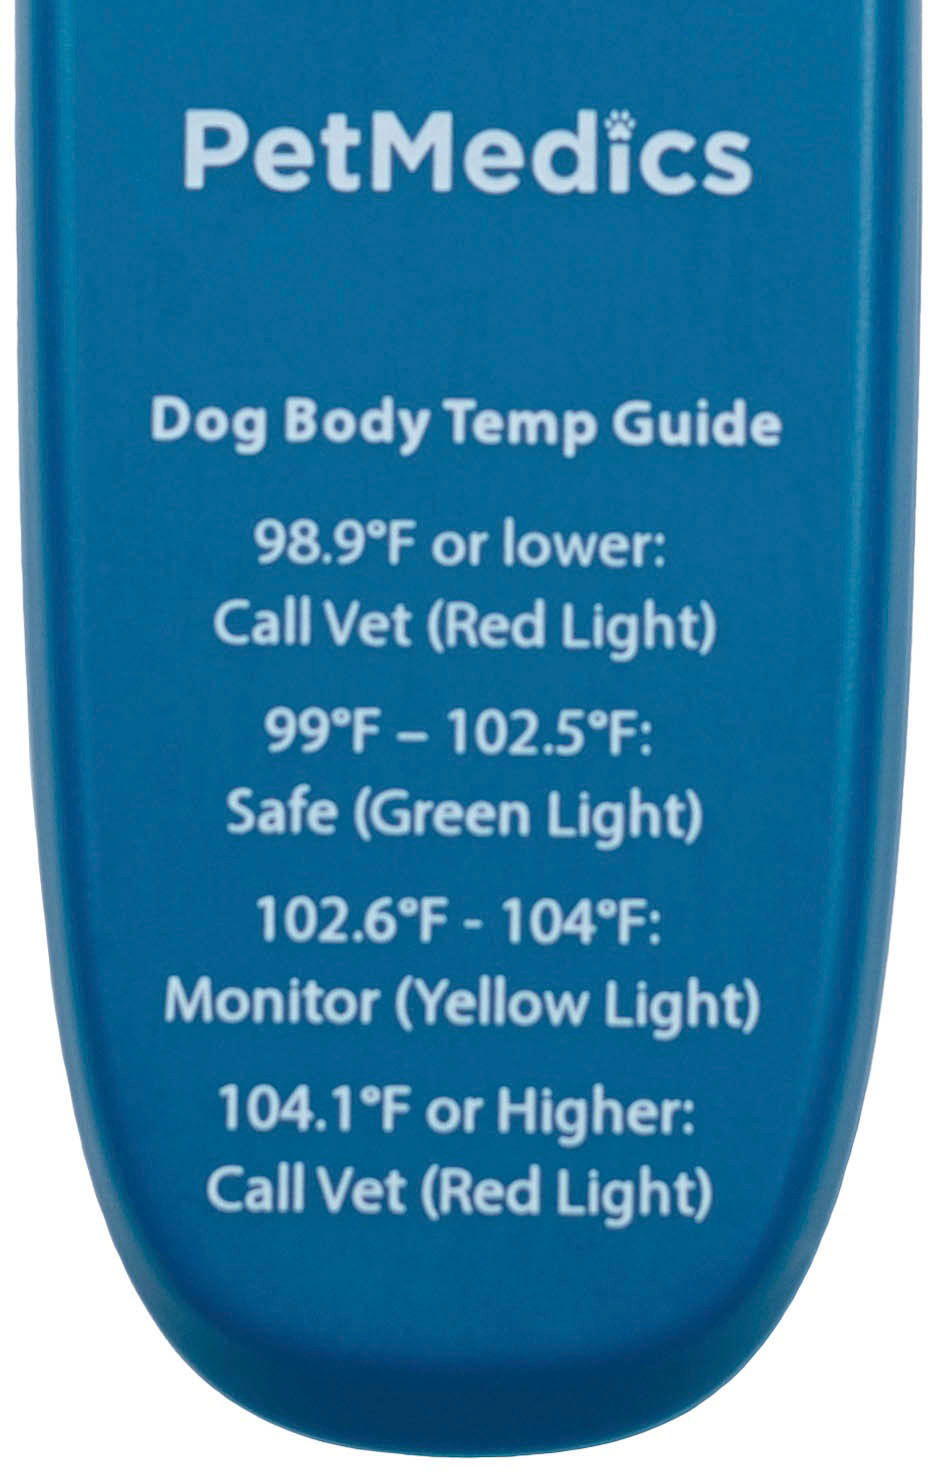 Pet Thermometer Dog Thermometer, Fast Digital Veterinary Thermometer,  Pet,CONTEC